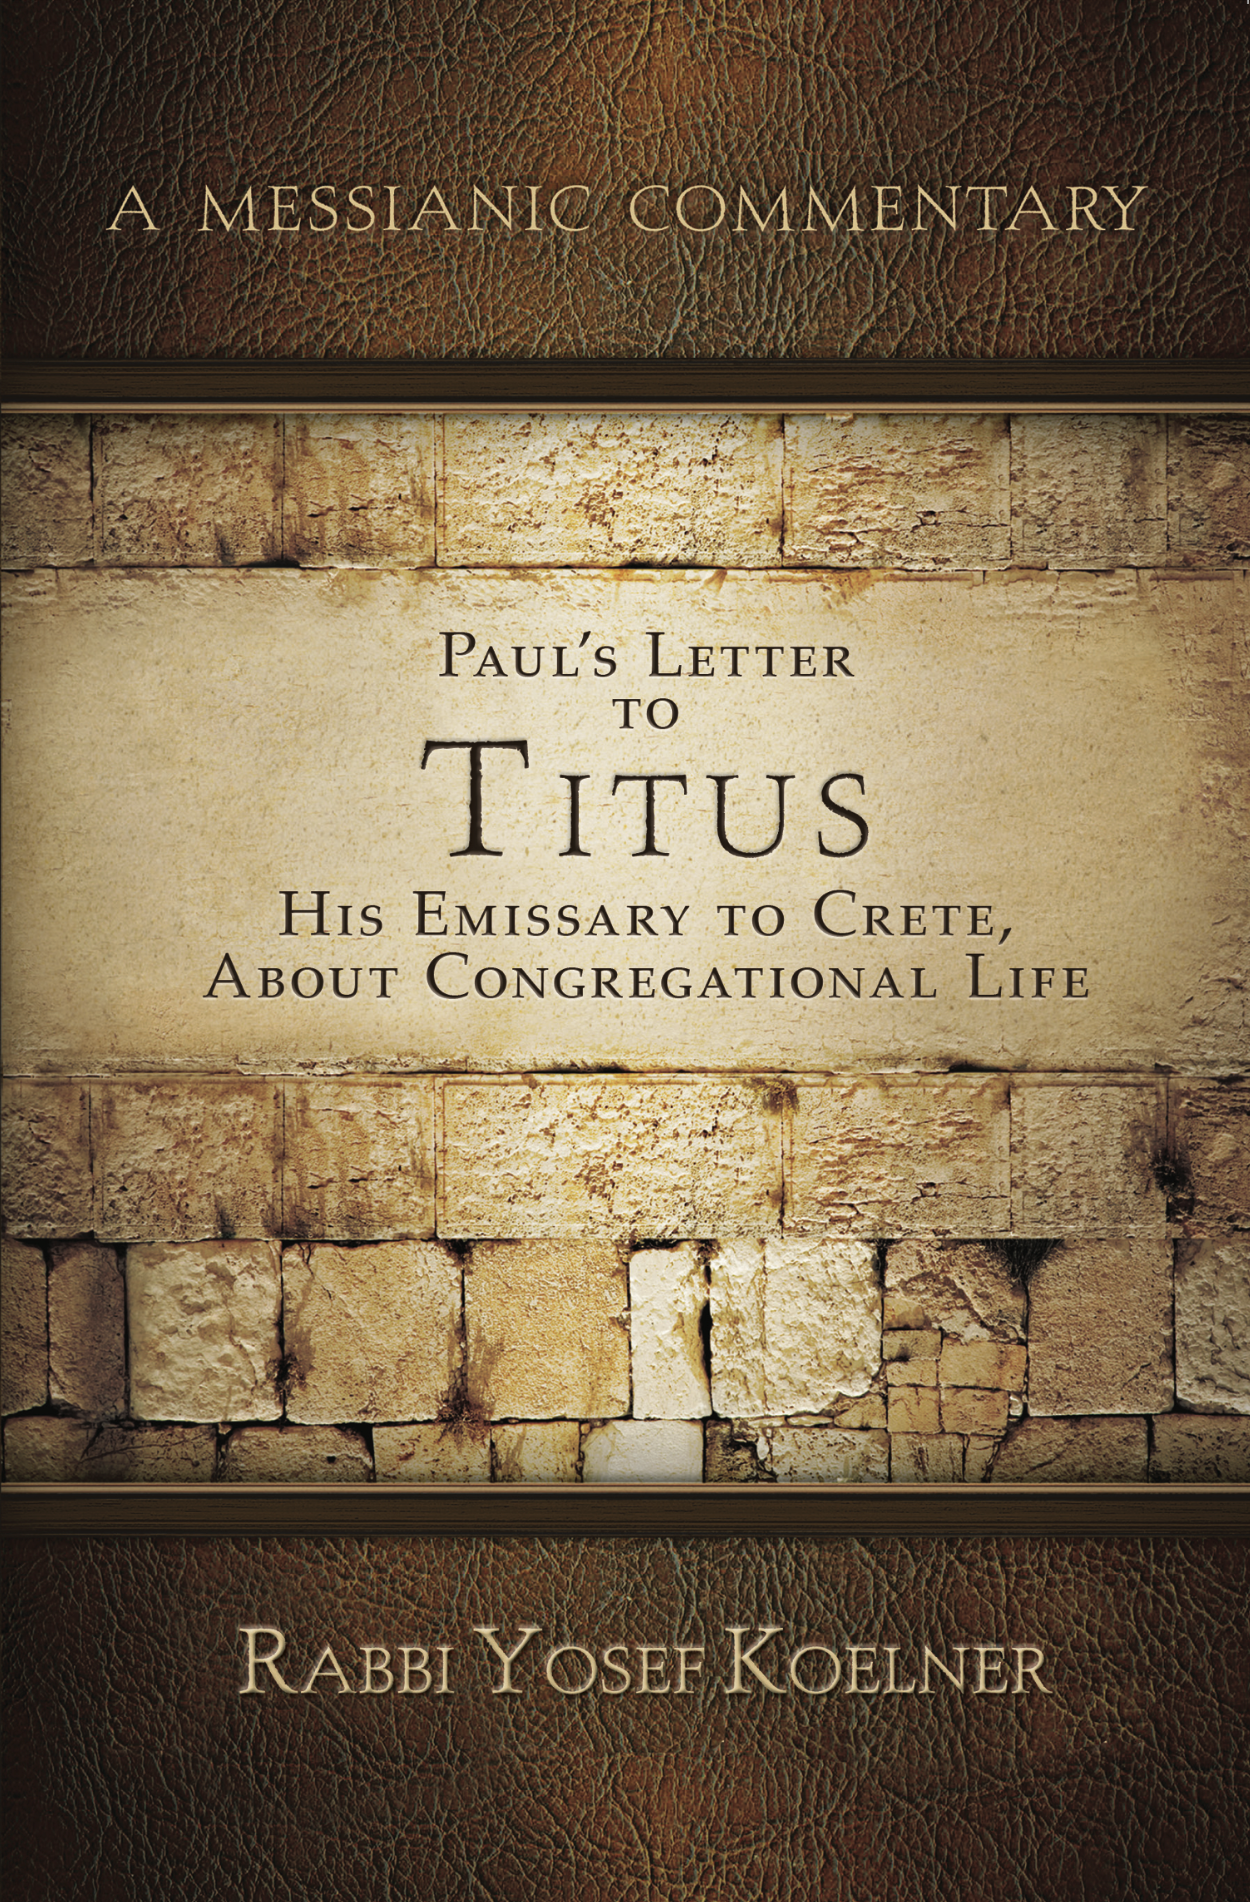 Paul's Letter to Titus: His Emissary to Crete, about Congregational Life by Rabbi Yosef Koelner